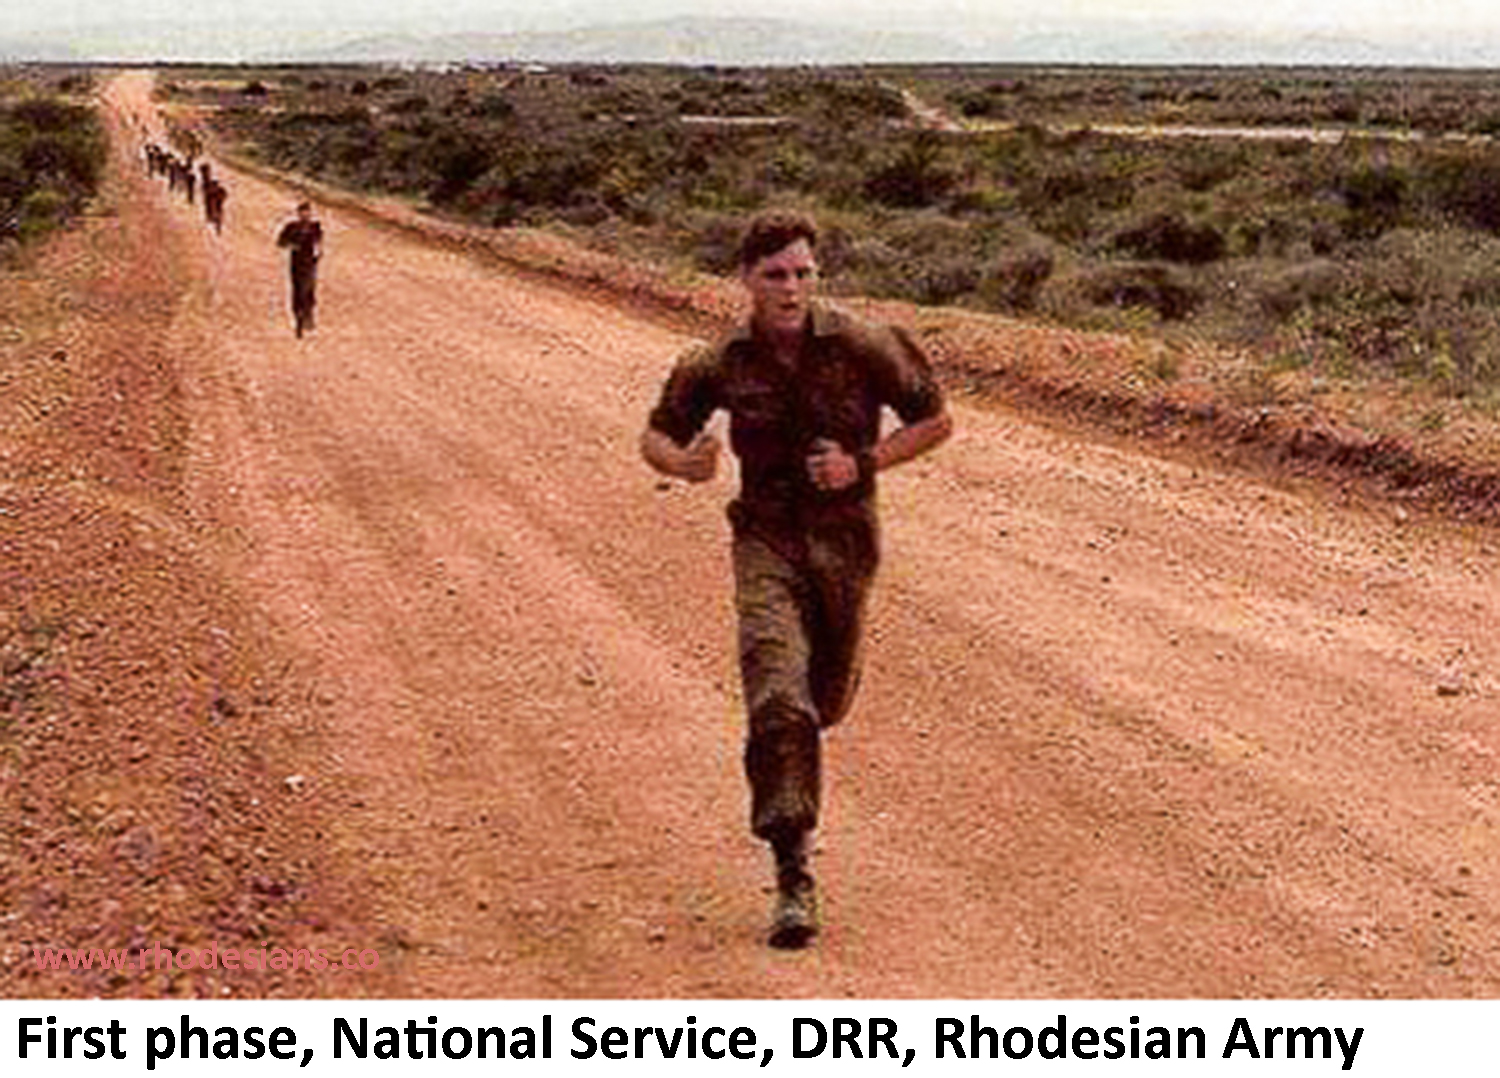 National Service intake on road run from llewellin Barracks during National Service Rhodesian army